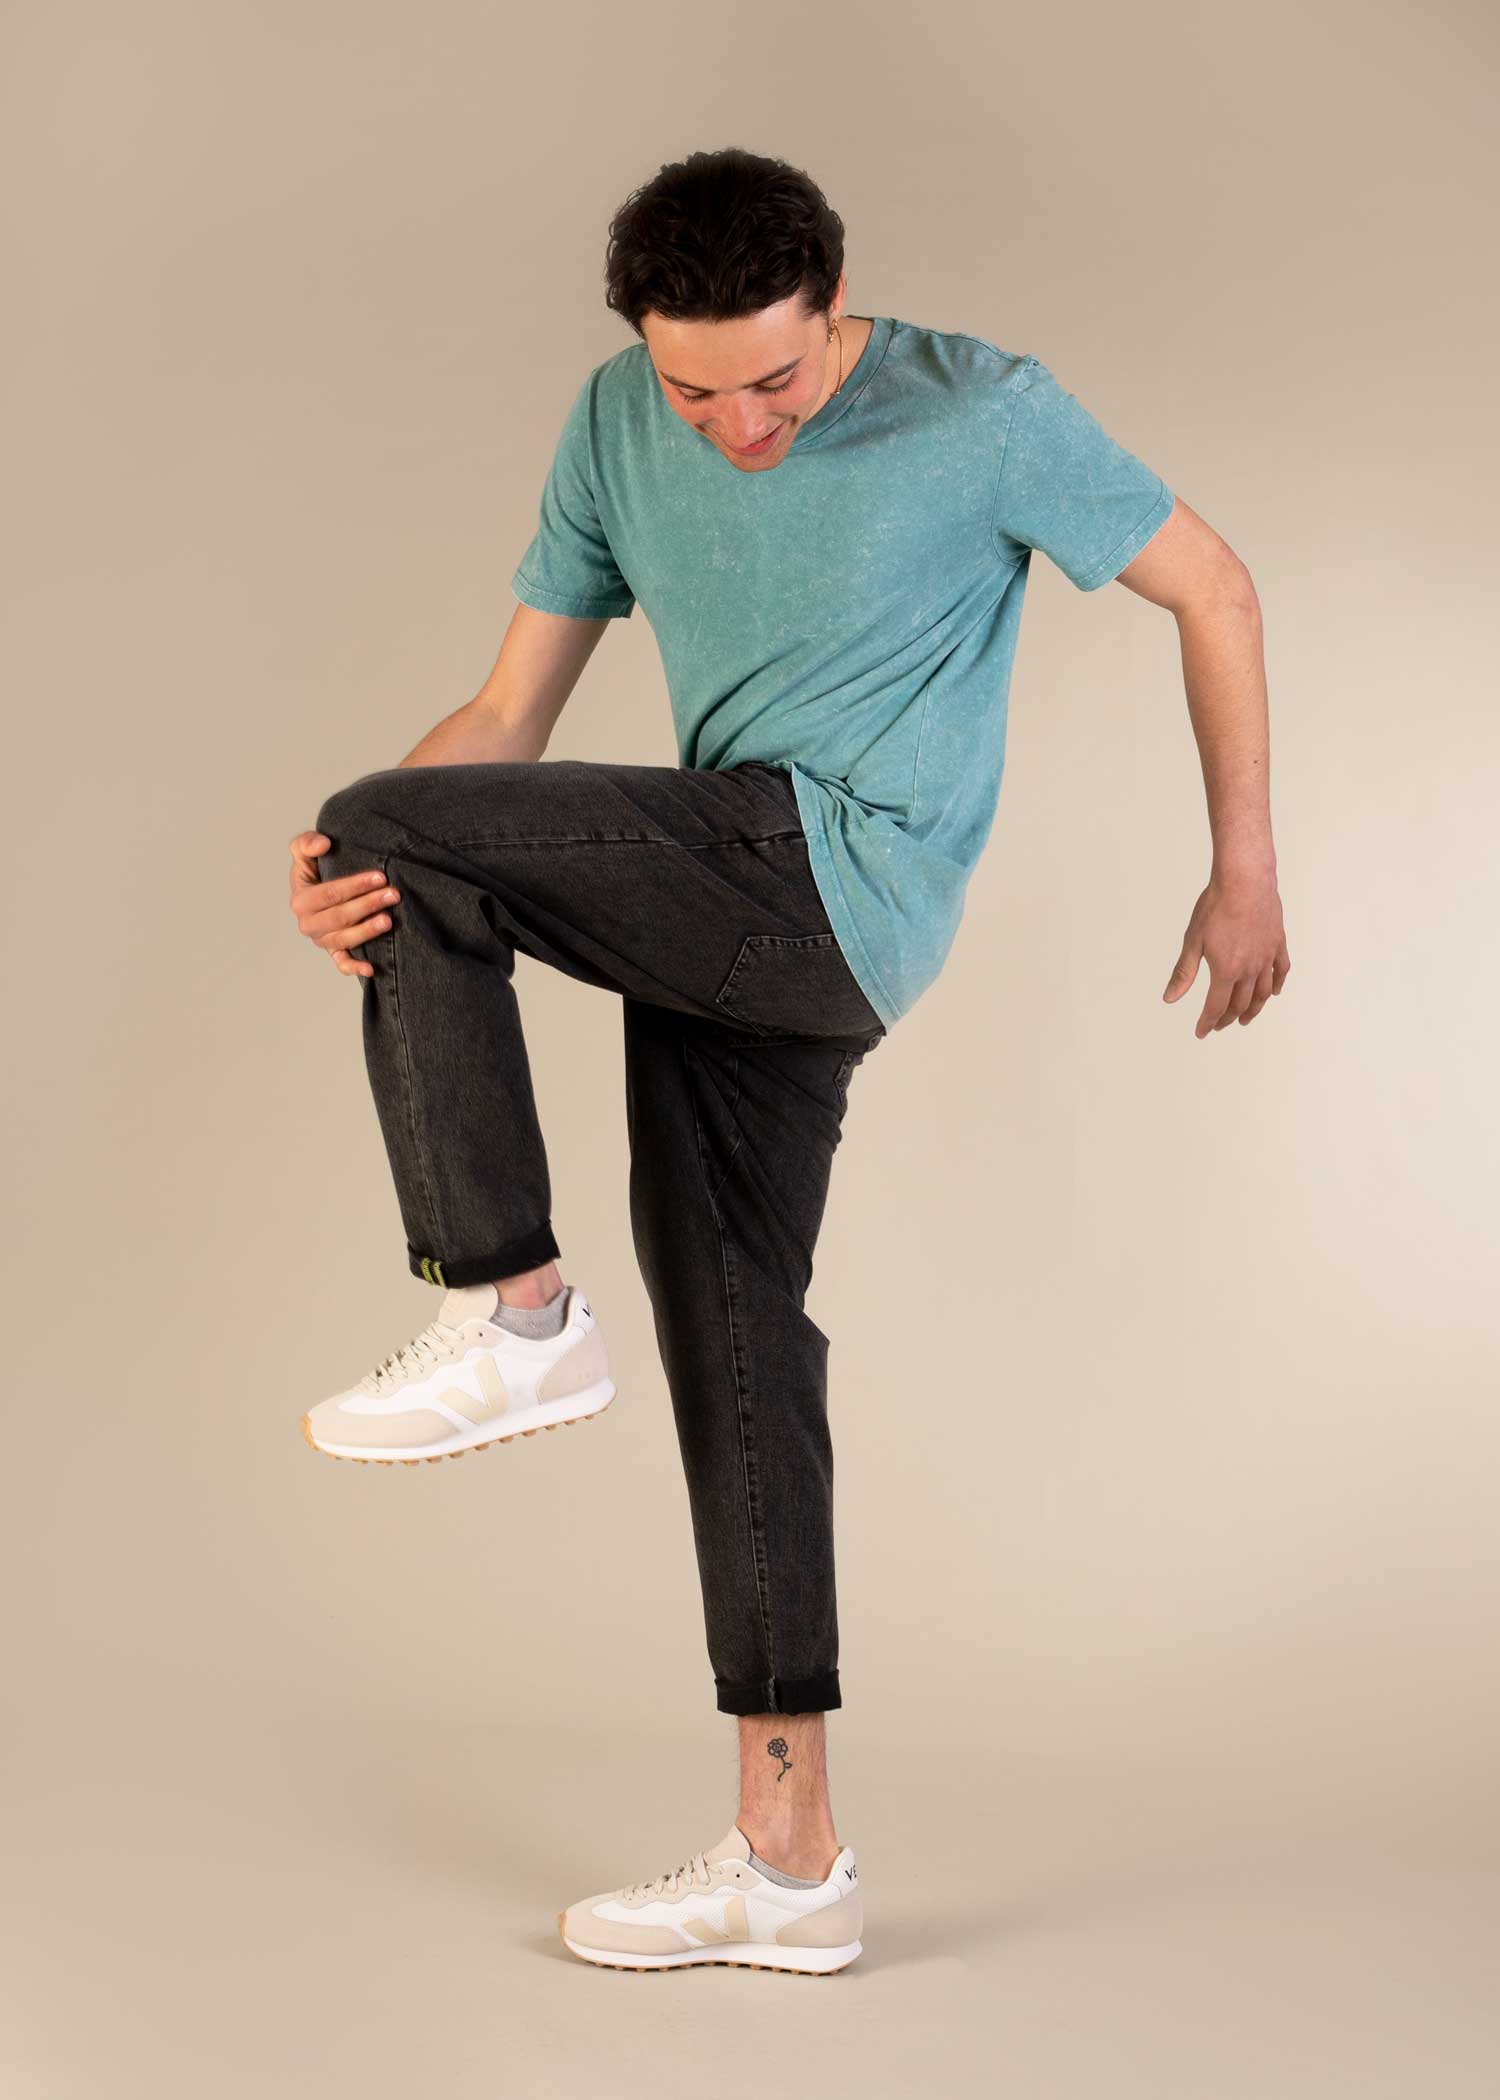 3RD ROCK unisex jeans for climbing - Kai is 6ft 1" with a 32" waist & 33" inseam, and is wearing a 32 RL. M